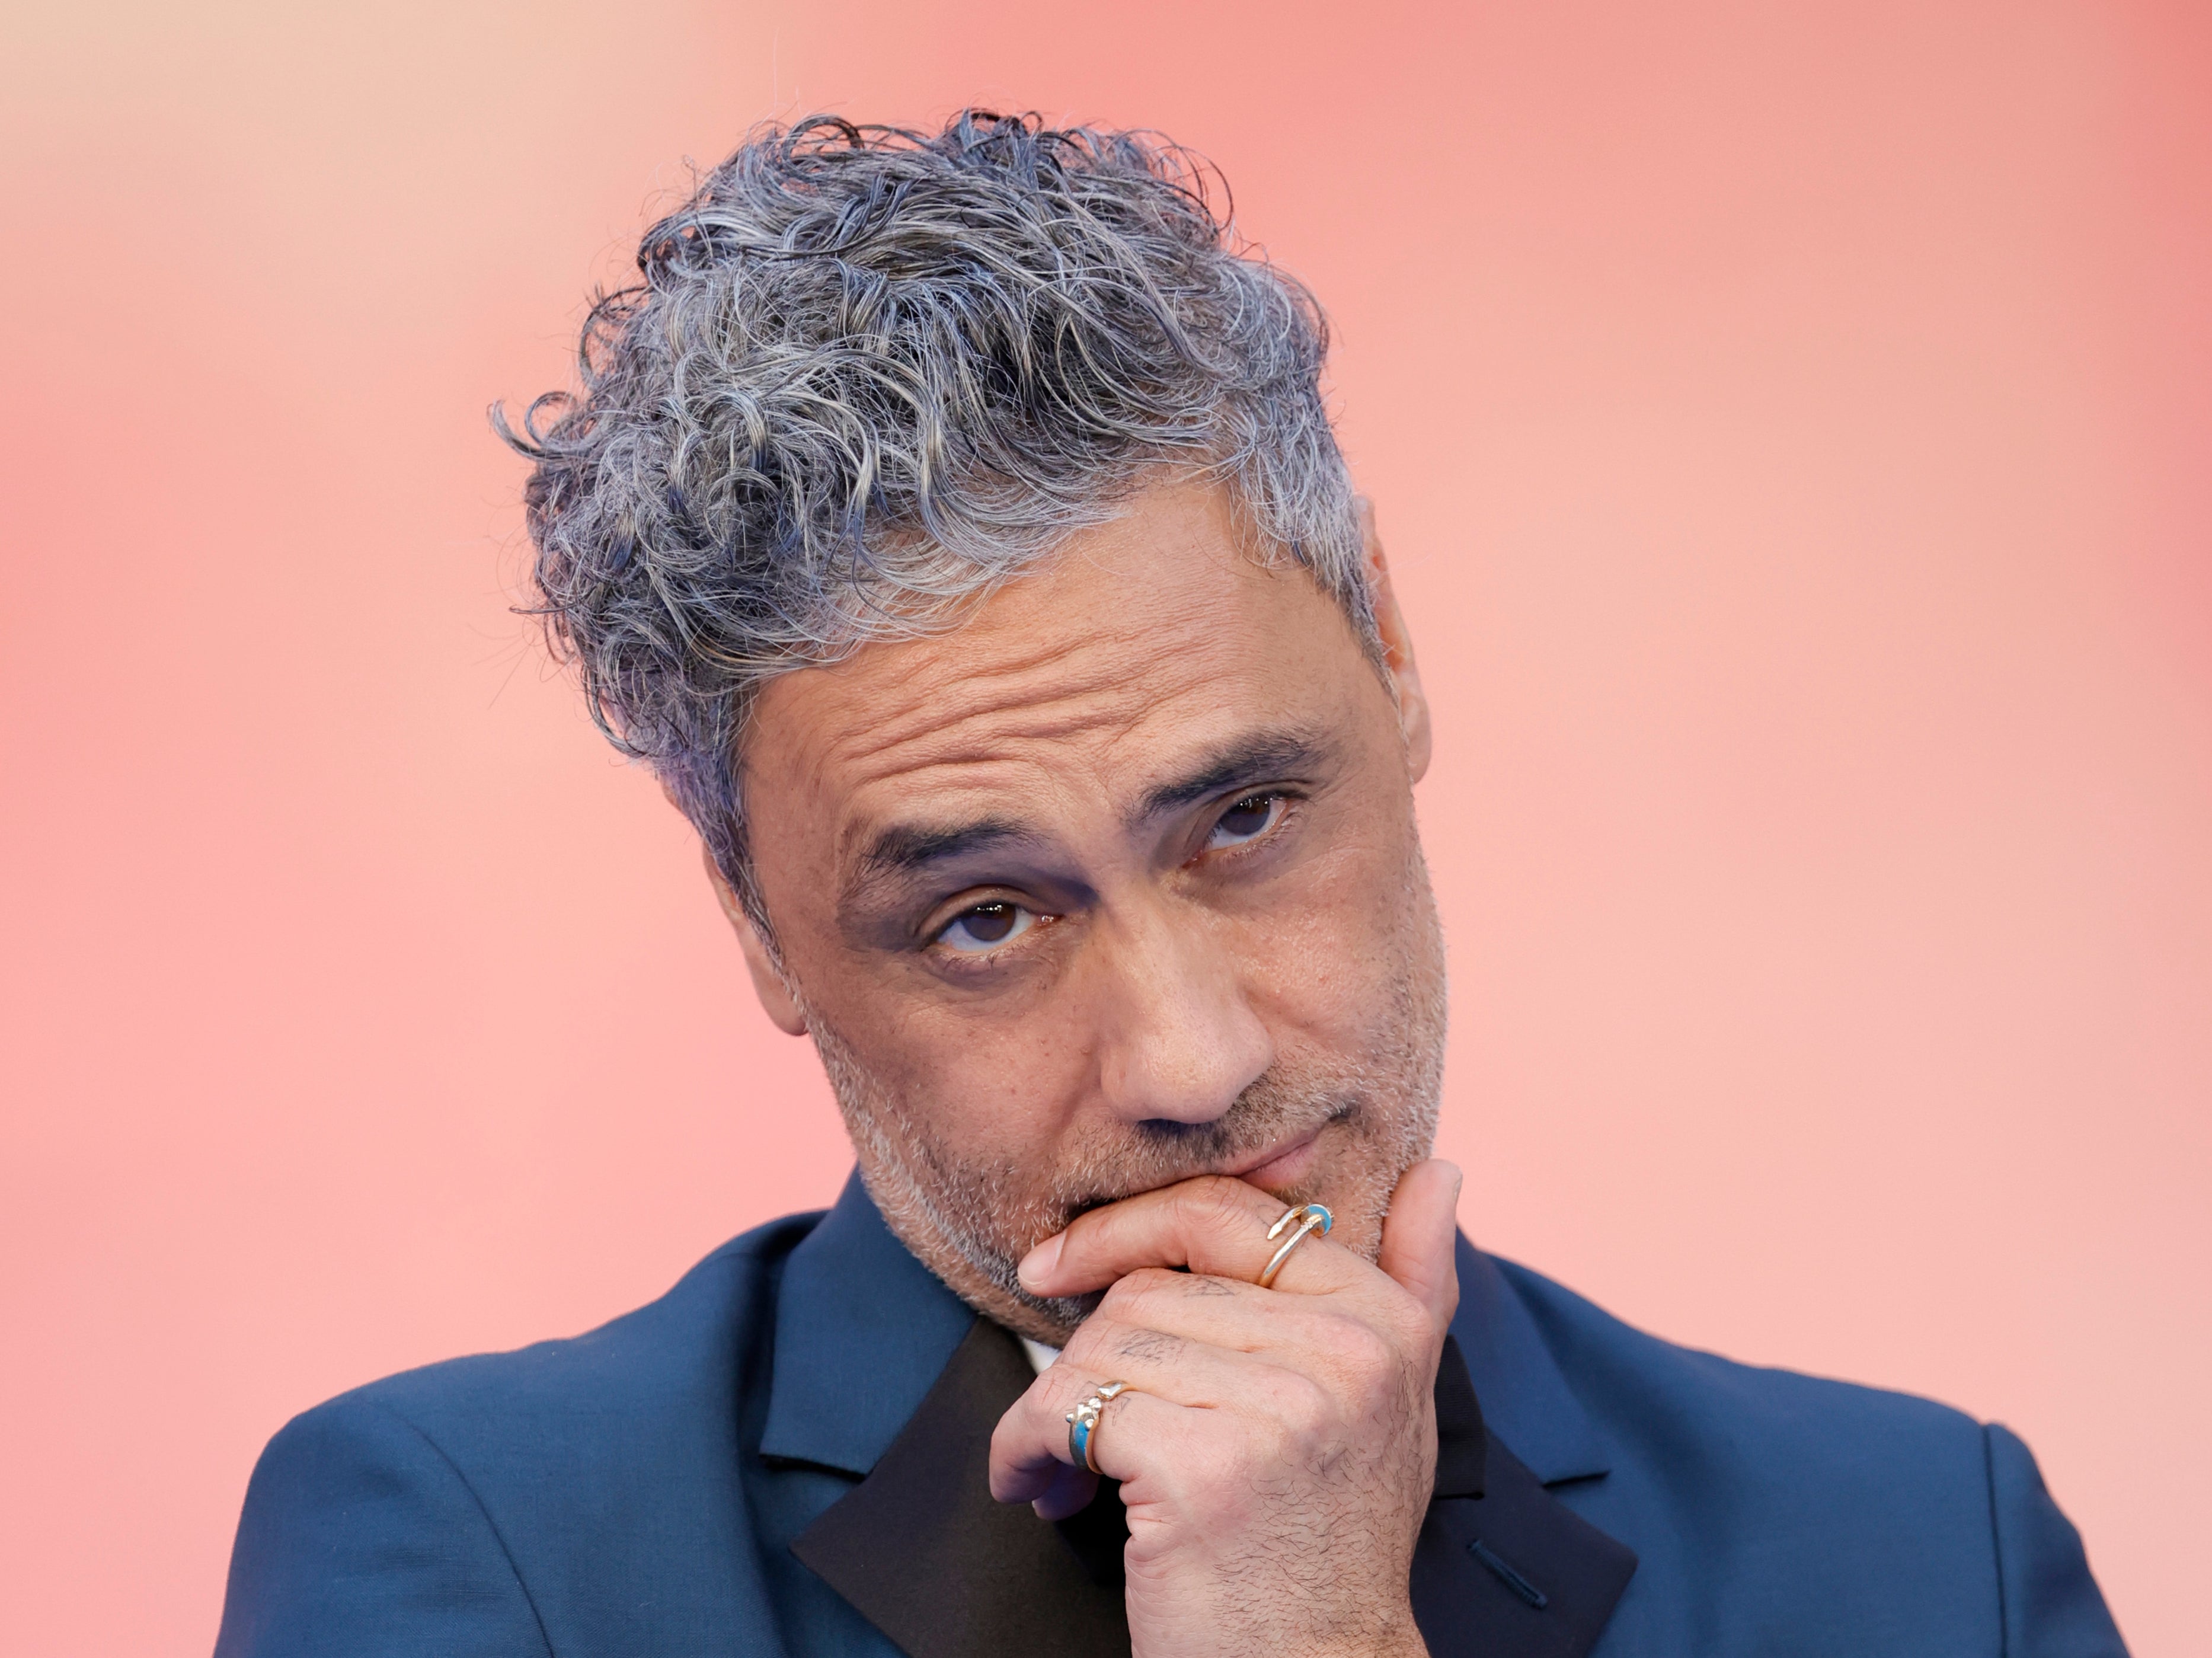 Taika Waititi is best known for directing the Marvel films ‘Thor: Ragnarok’ and ‘Thor: Love and Thunder’, as well as the Oscar-winning ‘JoJo Rabbit'